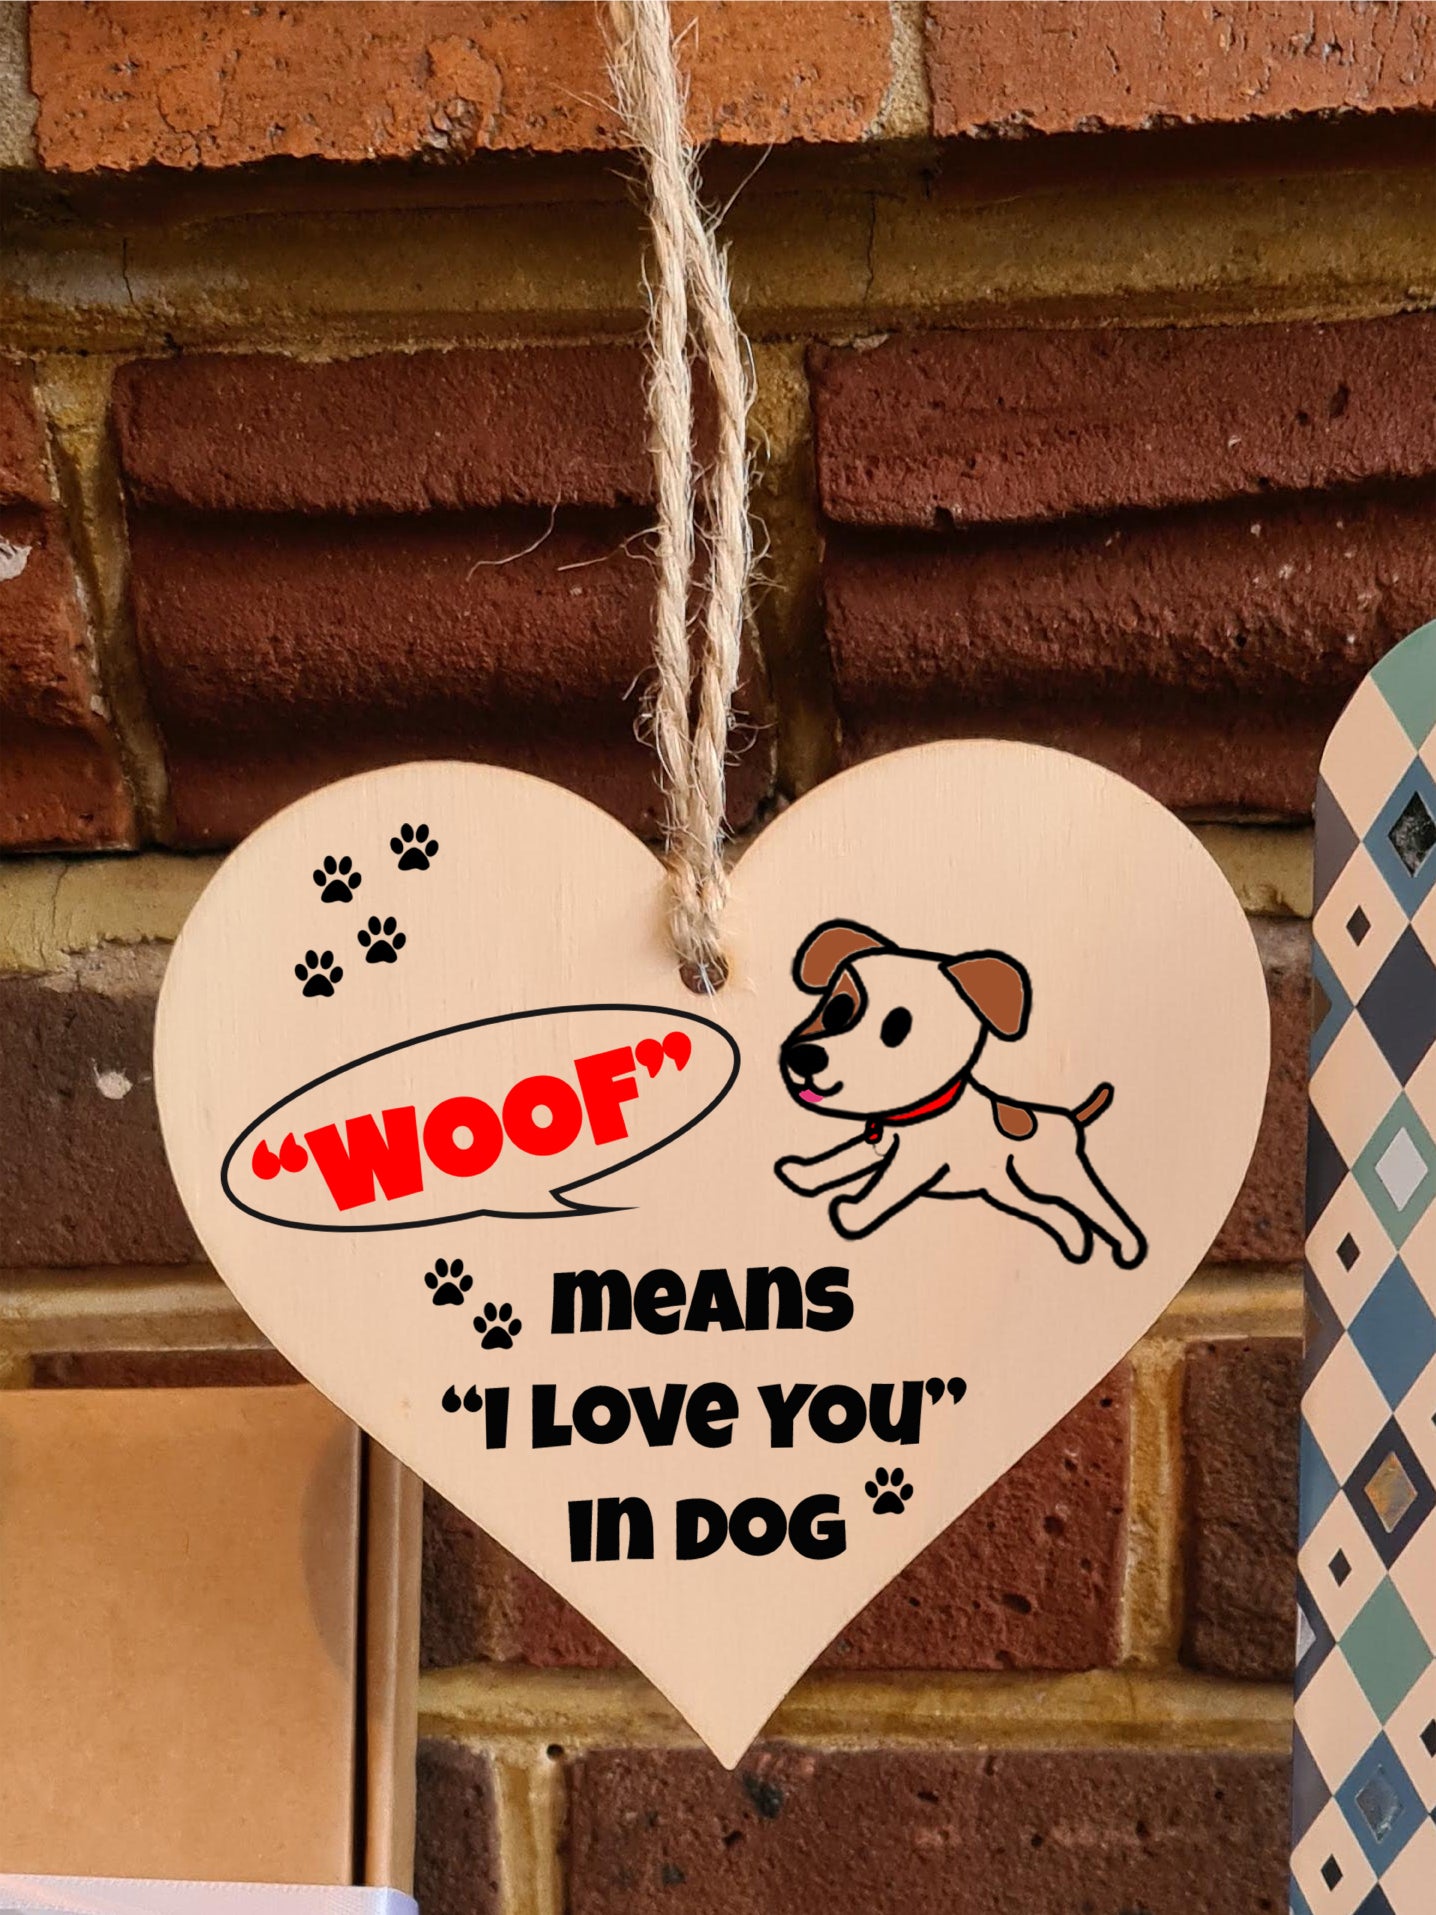 Handmade Wooden Hanging Heart Plaque Gift for Someone Special Dog Novelty Keepsake Mum and Dad from Kids